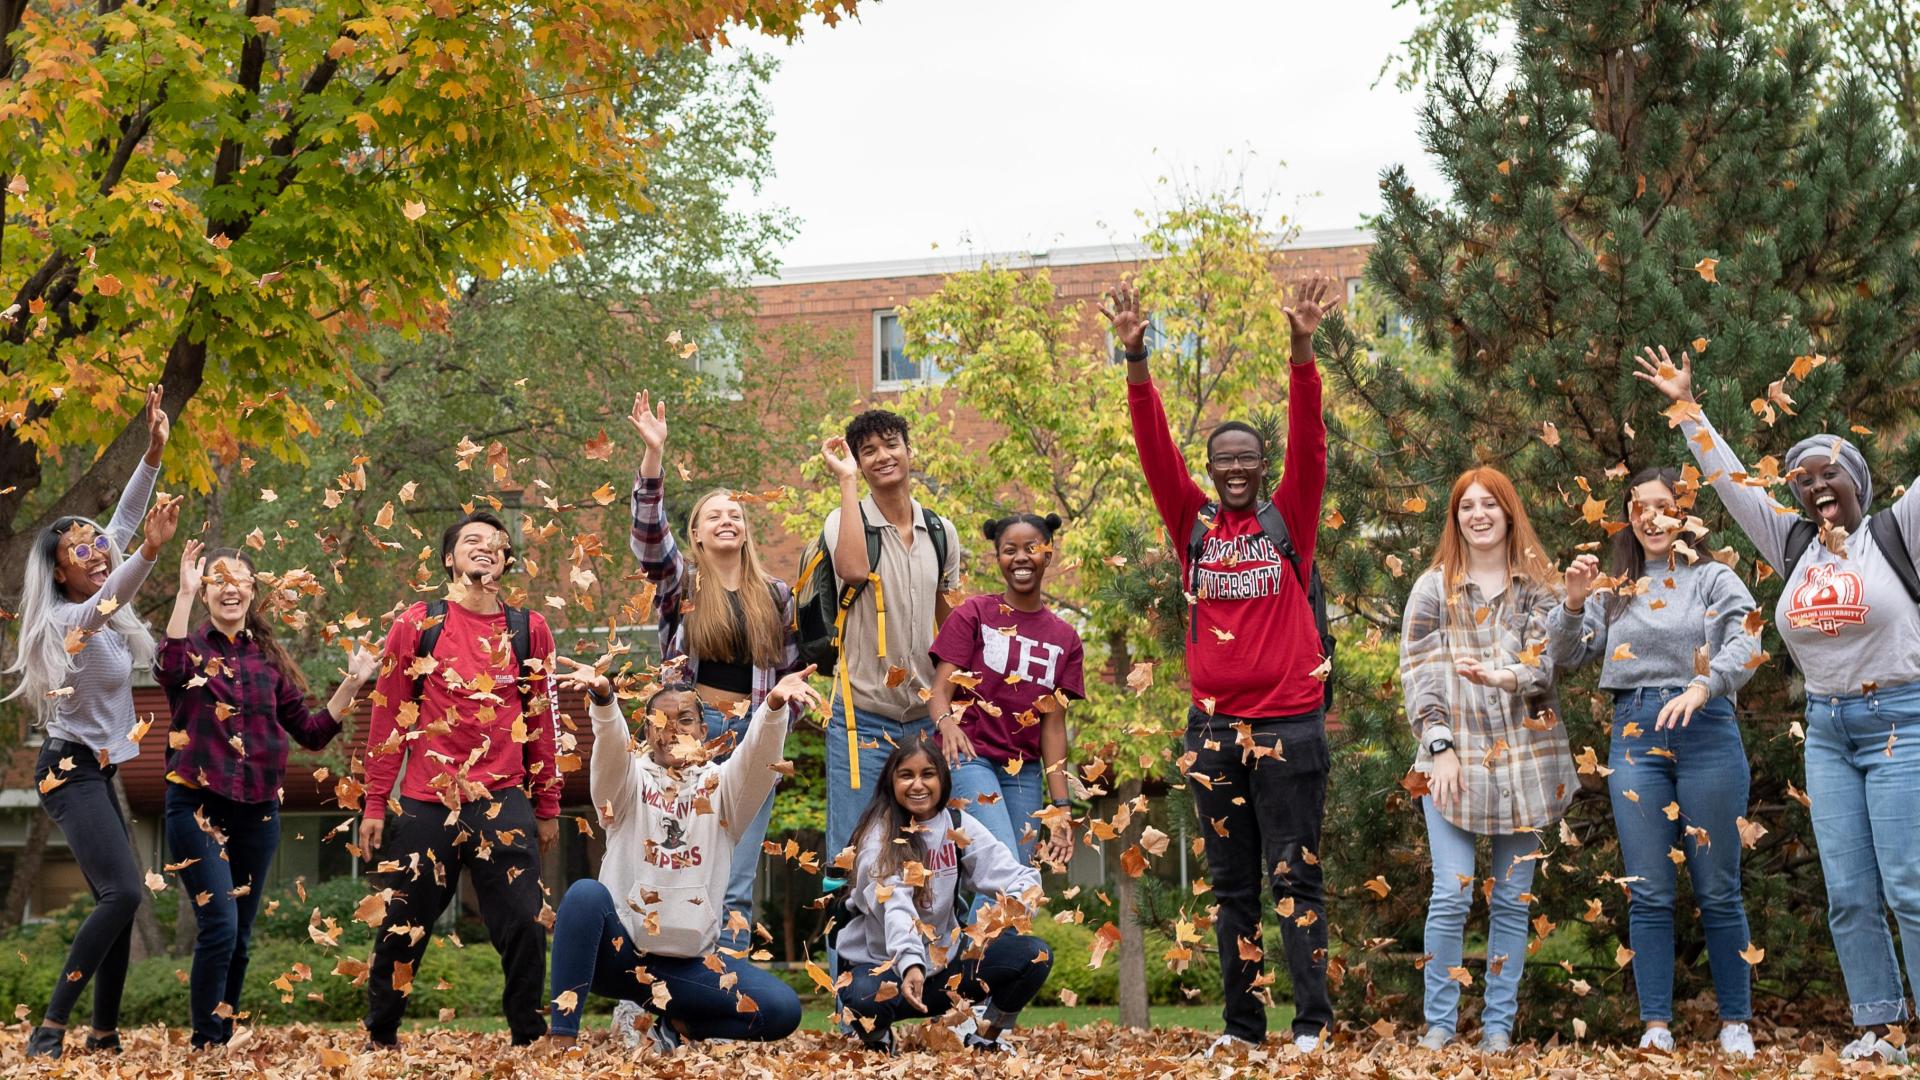   happy students at  during the fall blowing the leafs